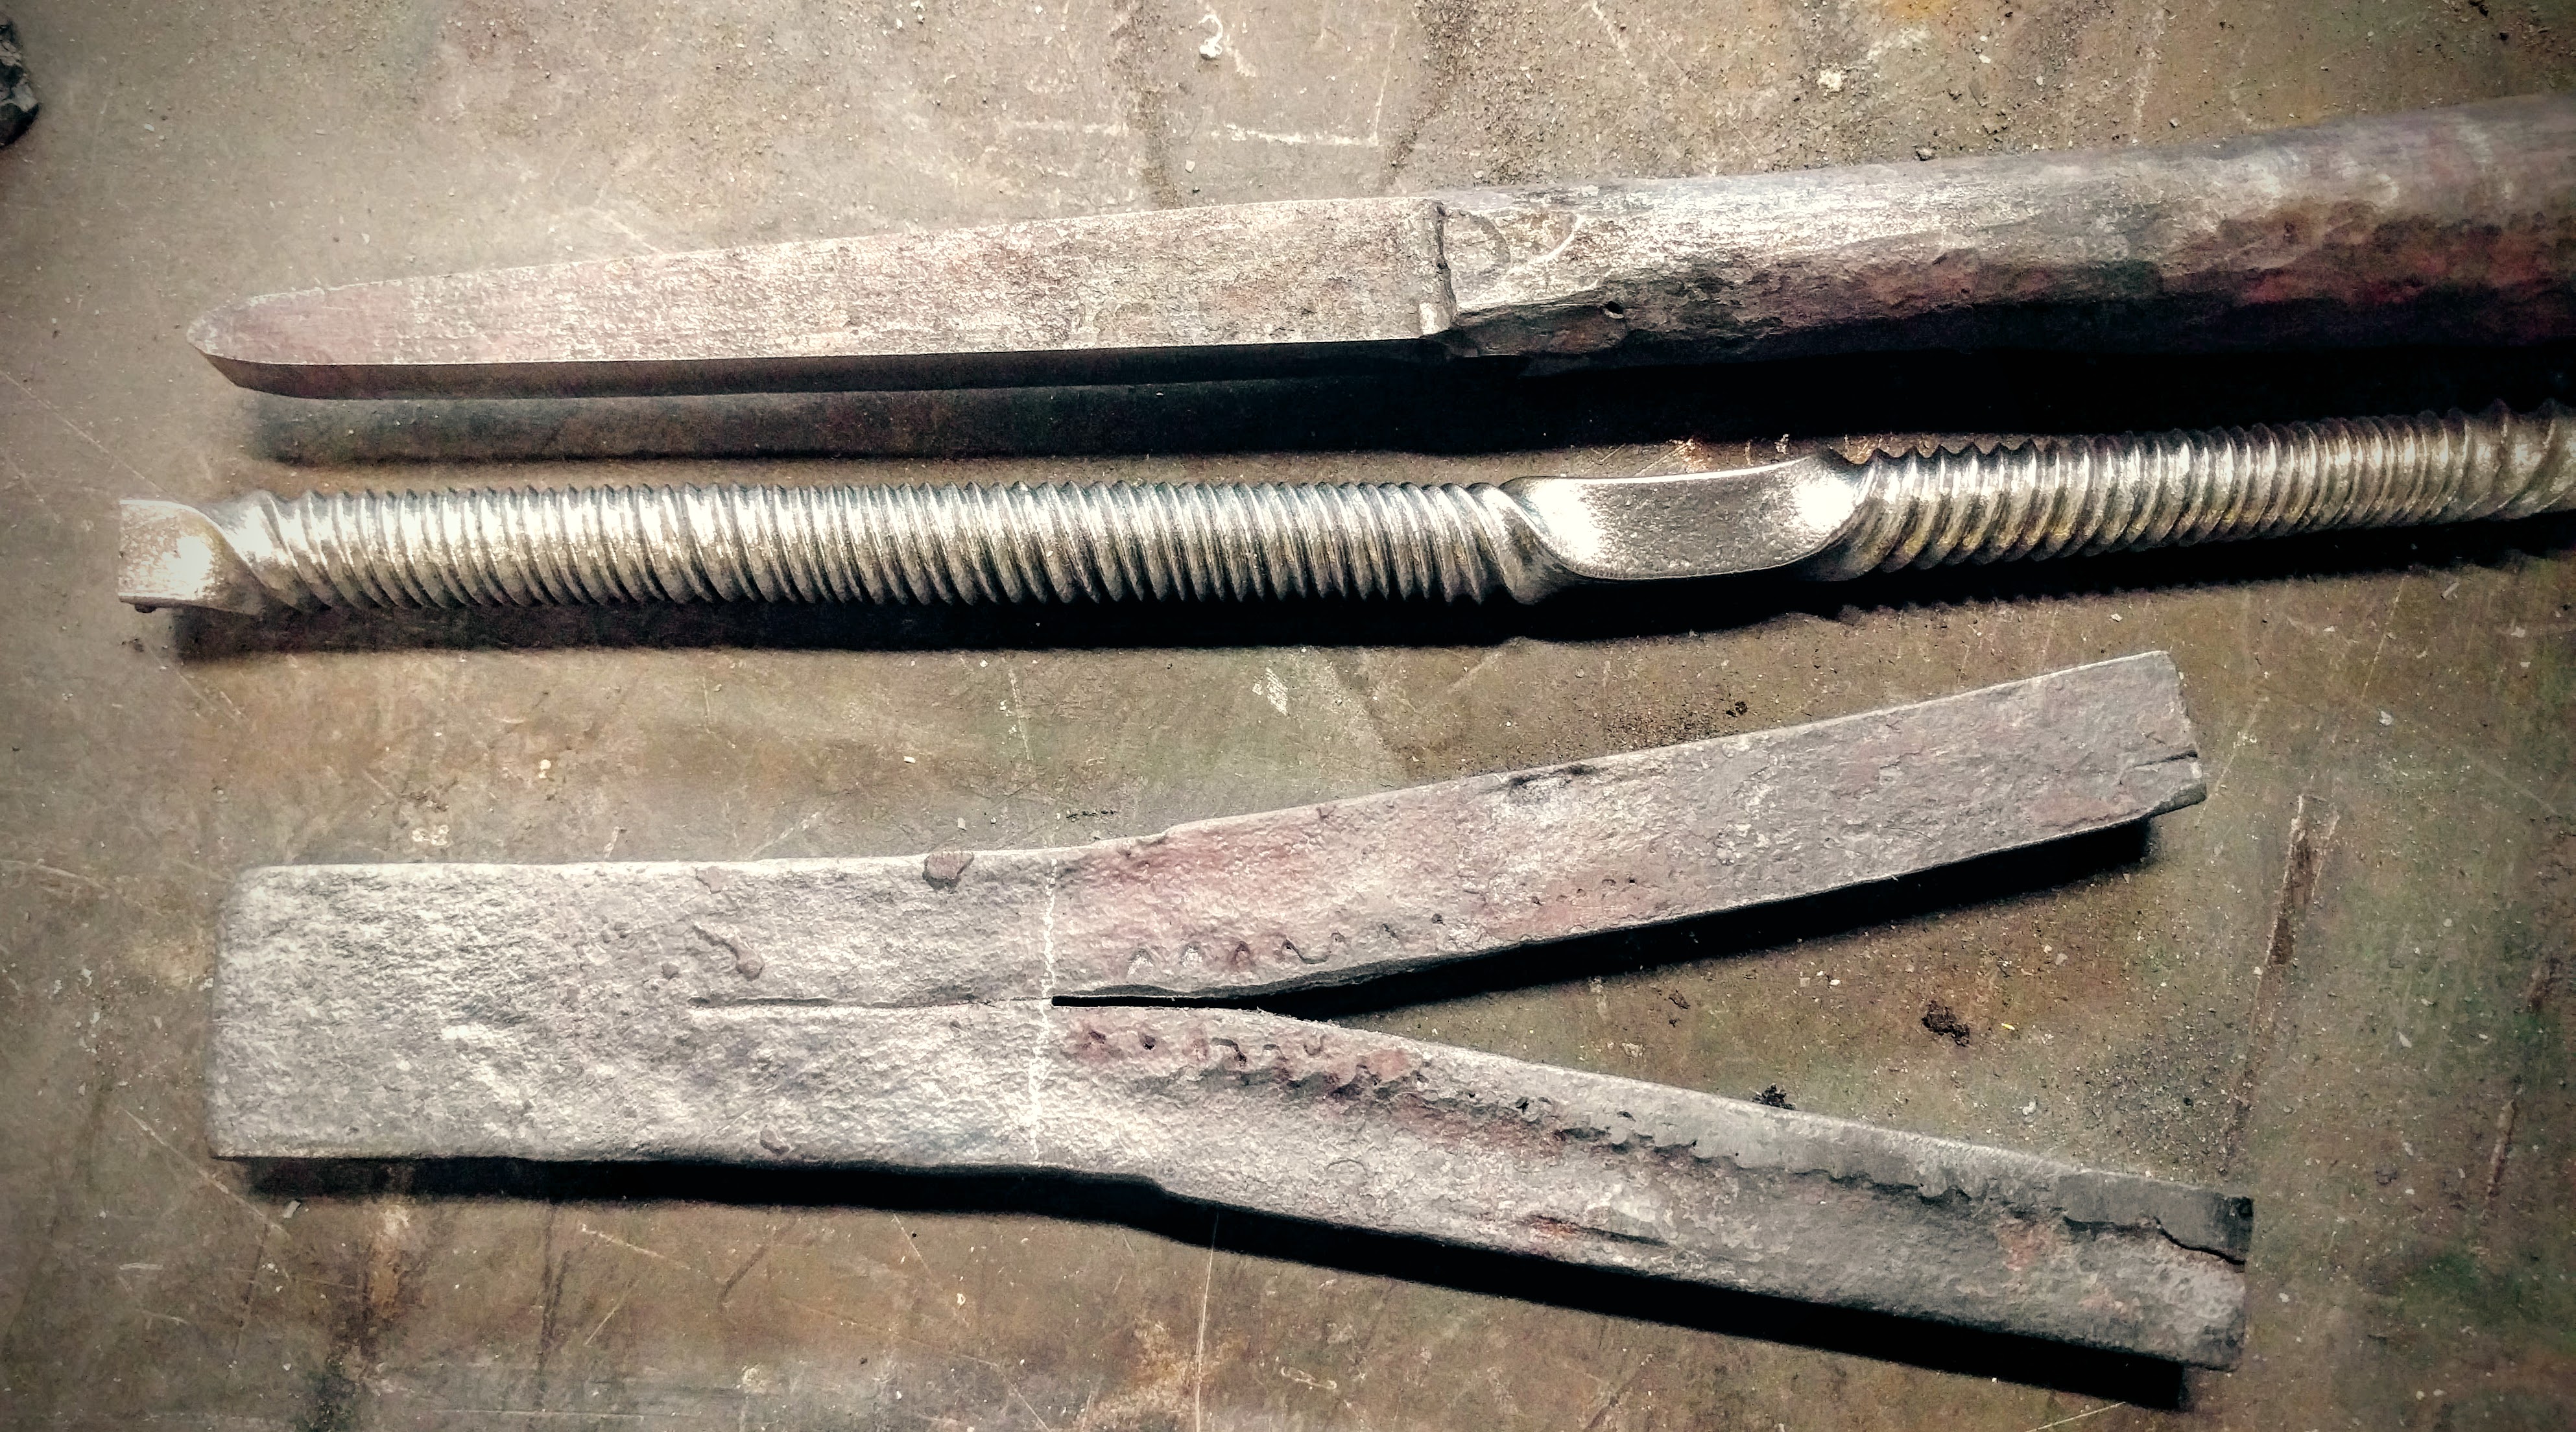 All components of the spear; ready for forge welding